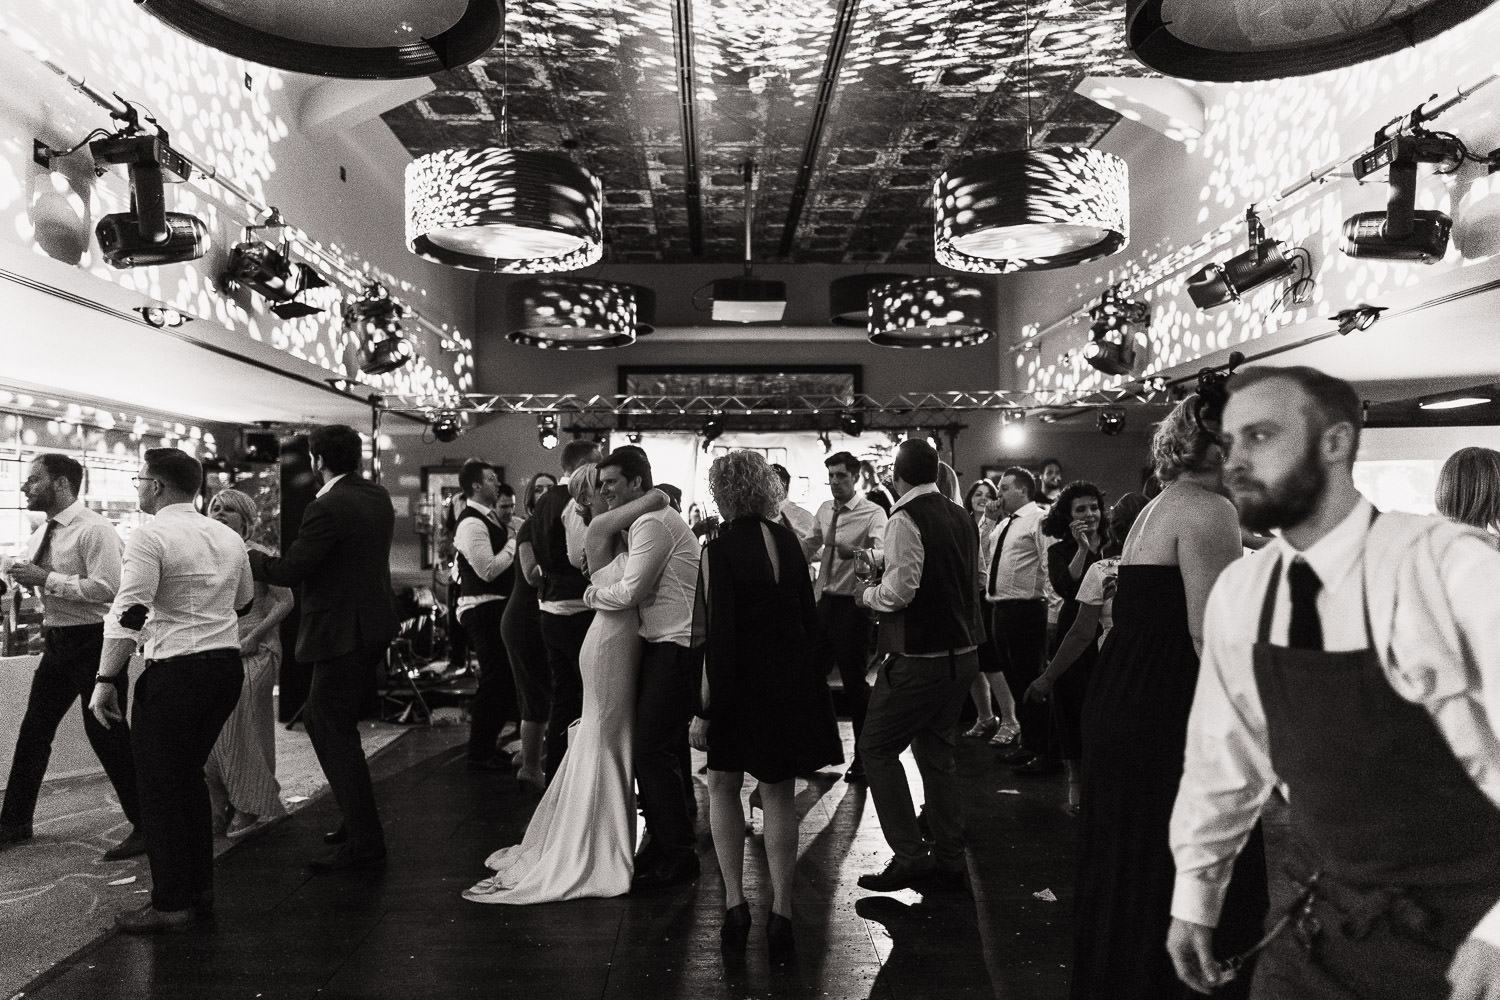 The Lion House wedding venue at The Lion Inn in Essex hosts a lively dance floor scene. The bride and groom dance in the middle while a waiter passes by. Located near the A12, this Chelmsford wedding venue is bustling with activity.